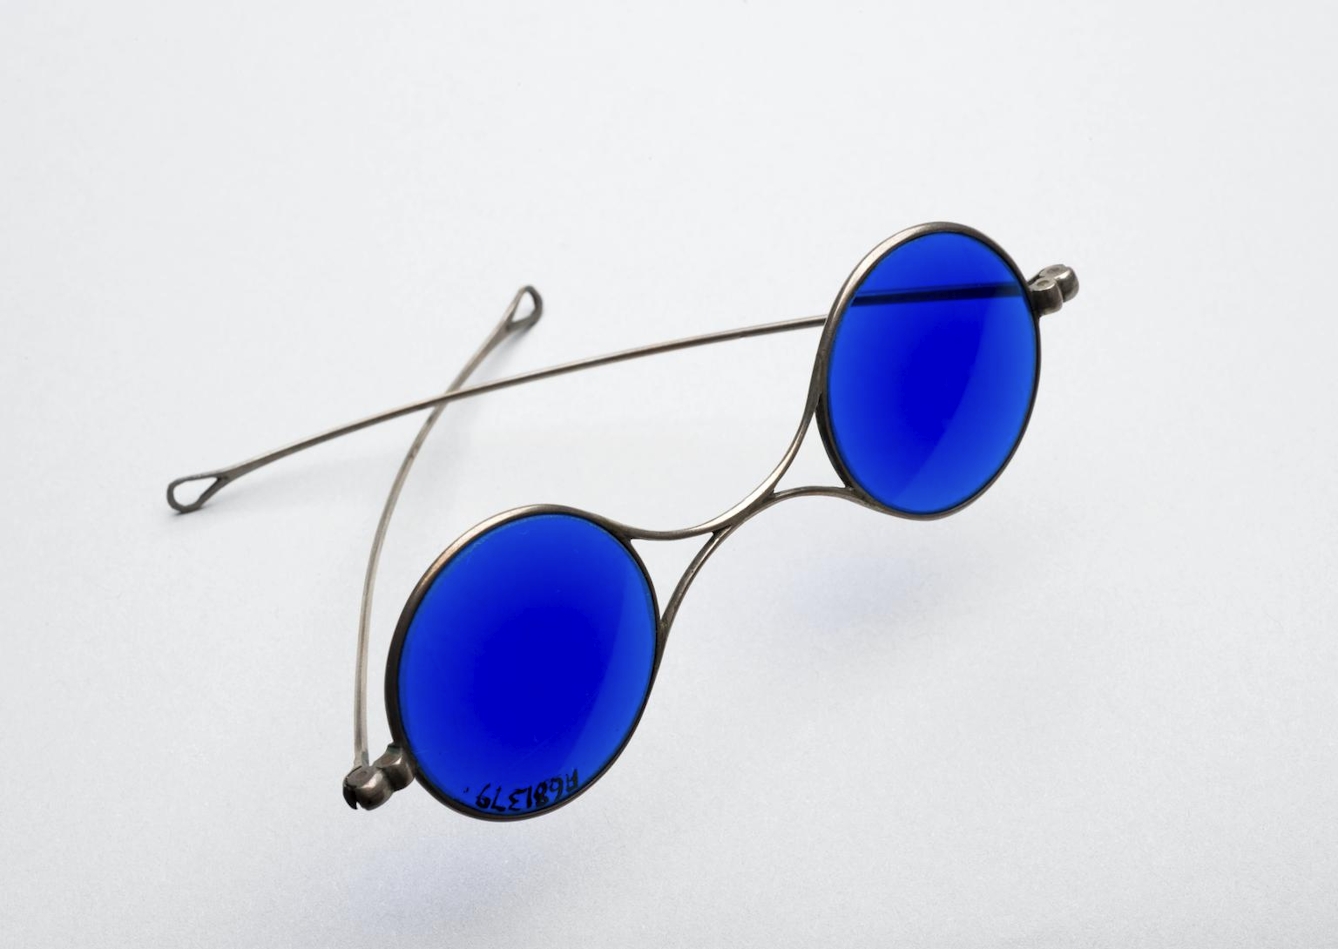 A photograph of a pair of sunglasses against a white background. The frames are made from a silver-coloured metal. The lenses are round and bright blue.